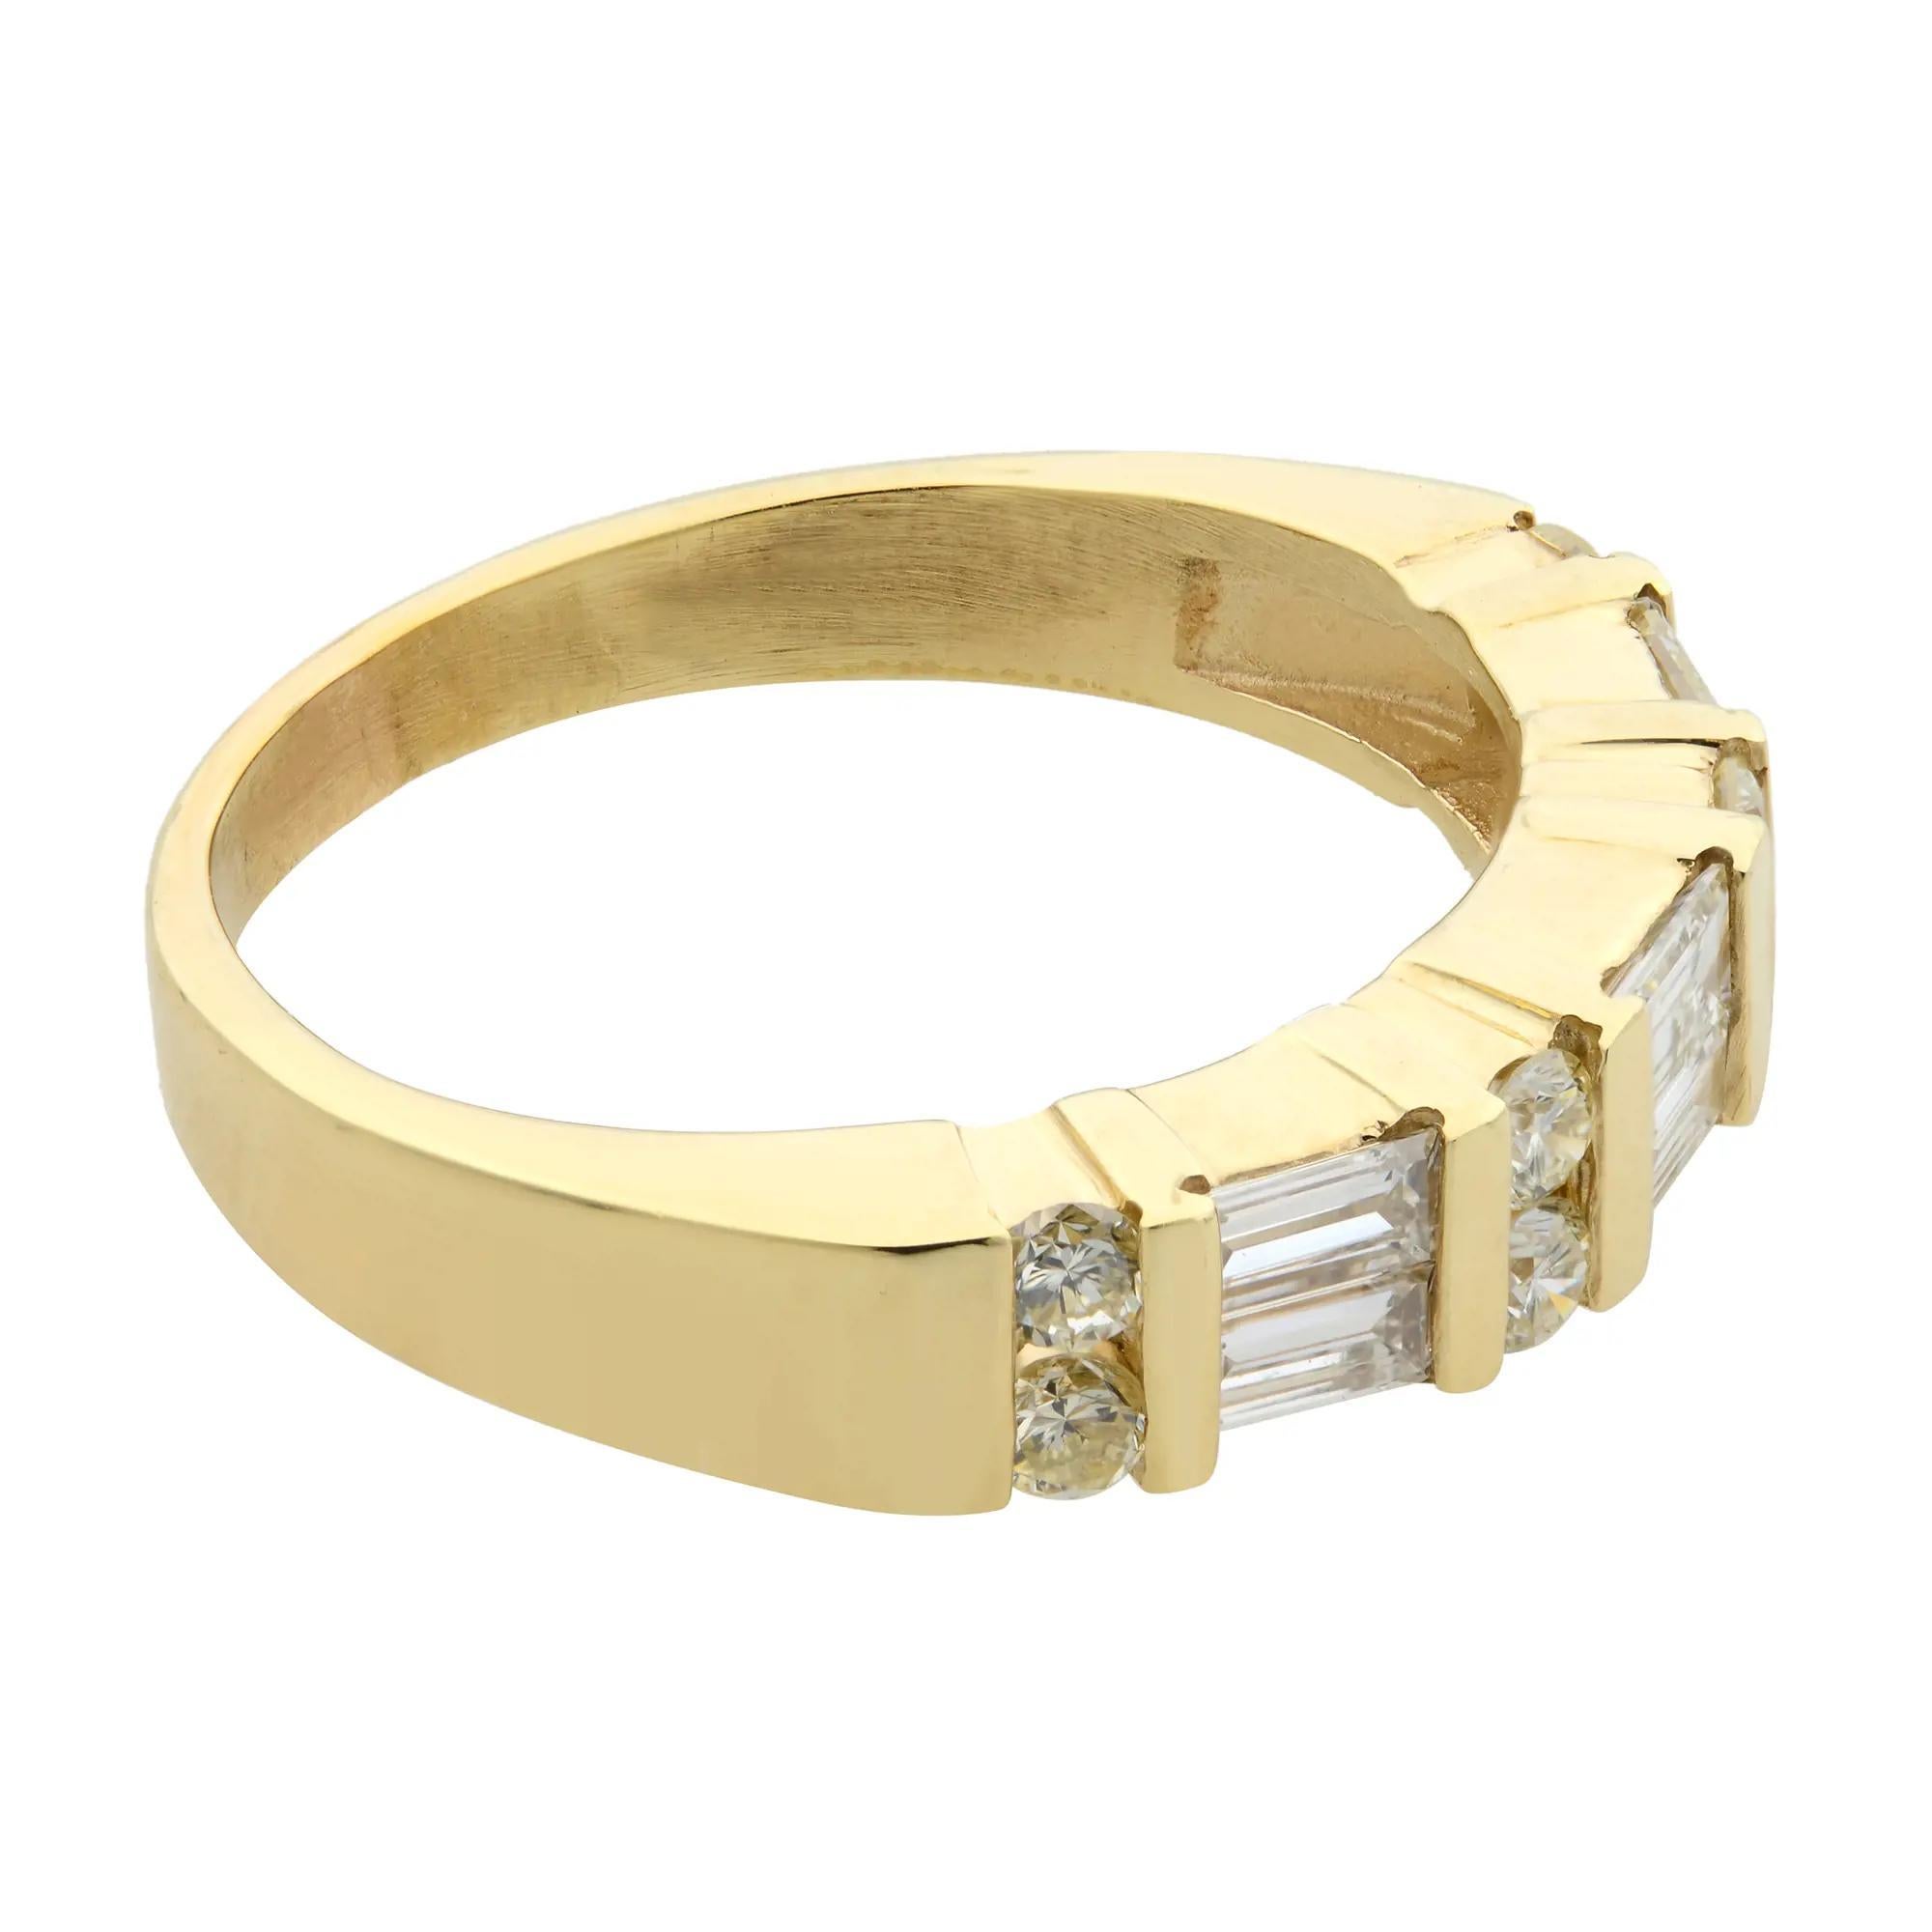 This beautiful band ring features shimmering baguette cut and round cut diamonds in channel setting that glimmers as it bends around the finger. Crafted in high polished 14k yellow gold. Diamond color G-H and VS-SI clarity. Total diamond weight: